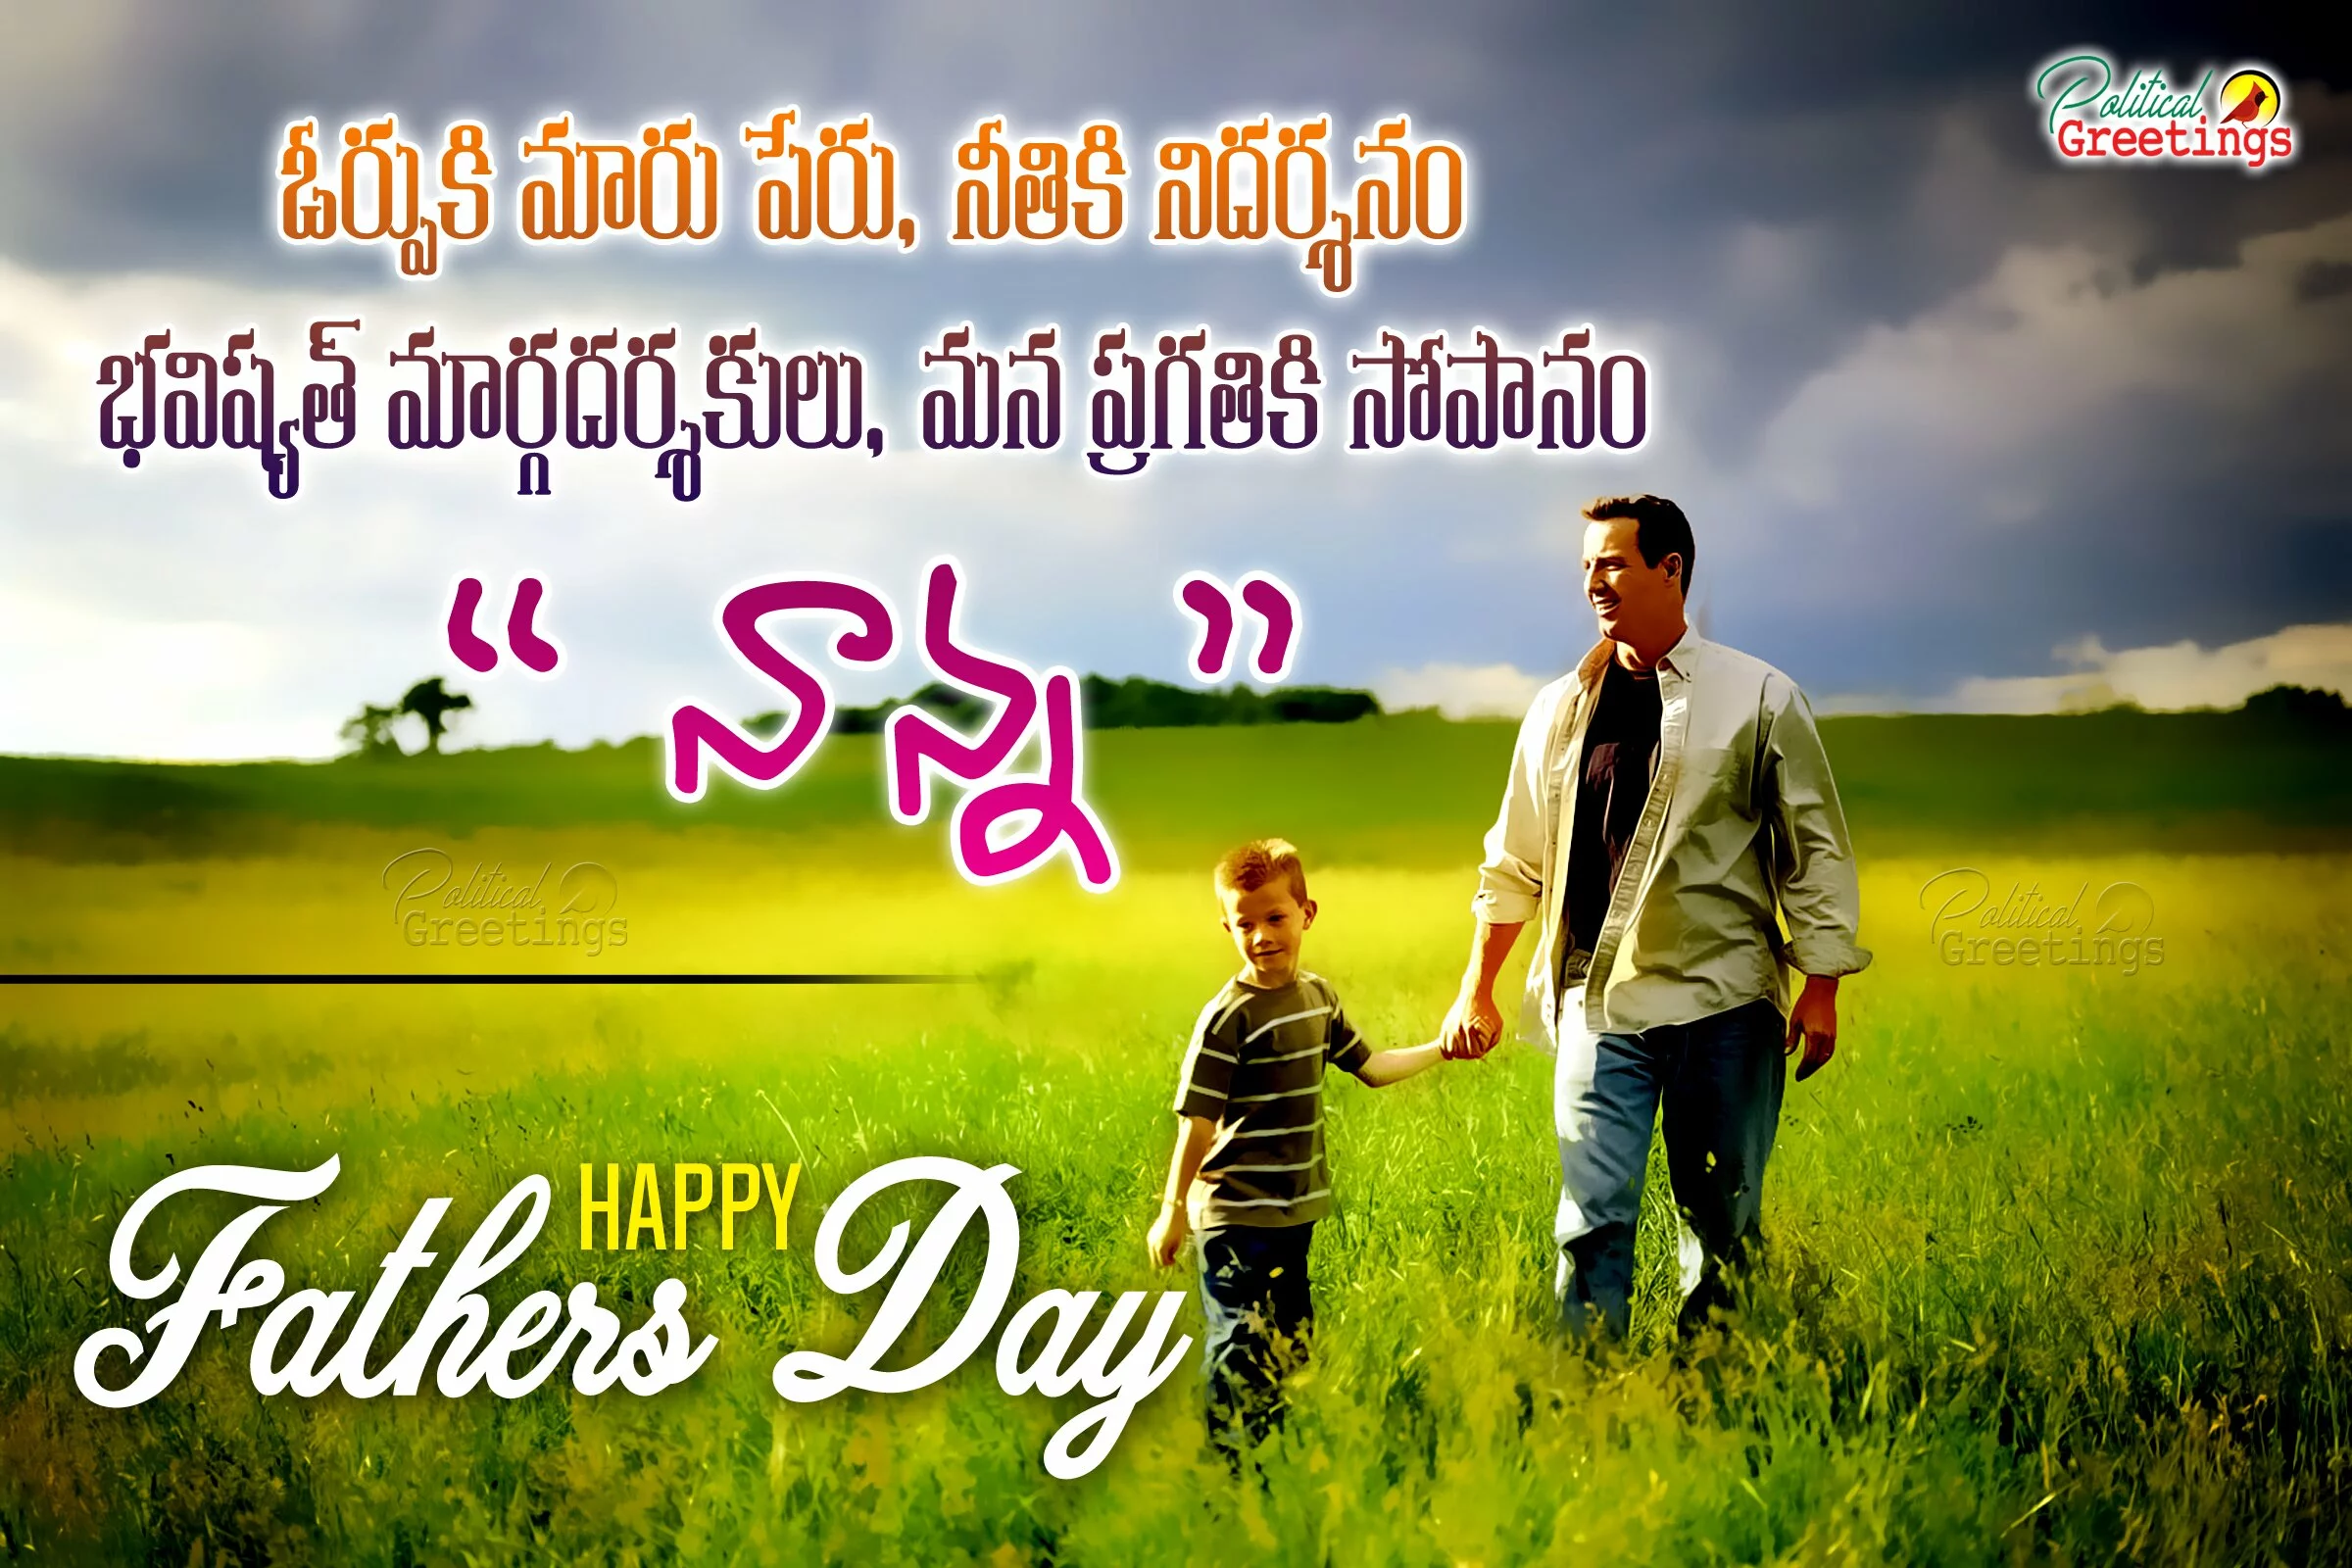 happy-fathers-day-telugu-wishes-quotes-greetings-sms-messages1